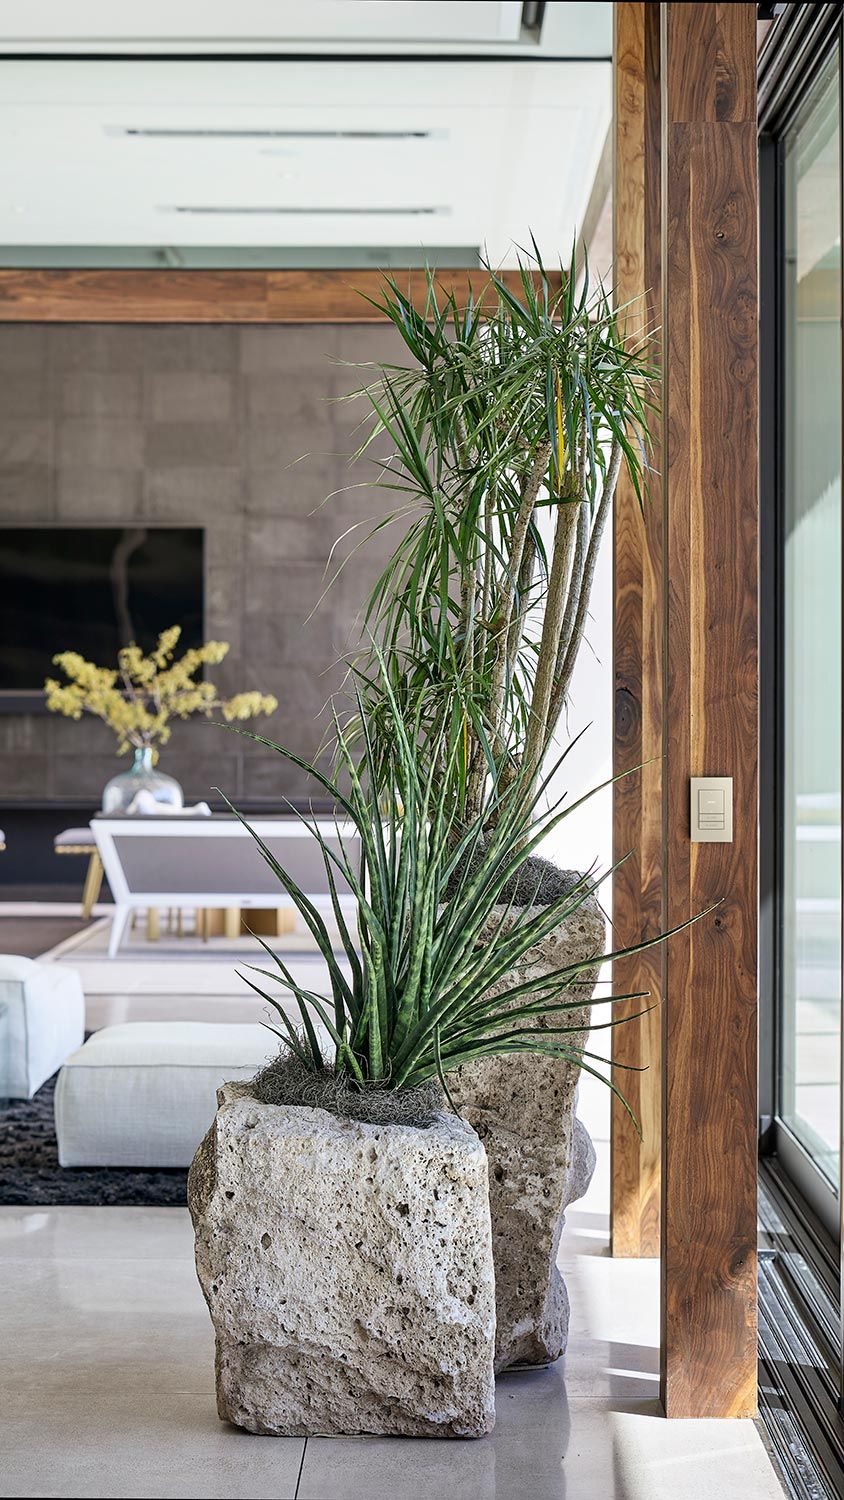 A stylish living room with large rock planters holding green plants, modern furniture, and a TV mounted on the wall. A Crestron Lighting Control Keypad is on the right side.